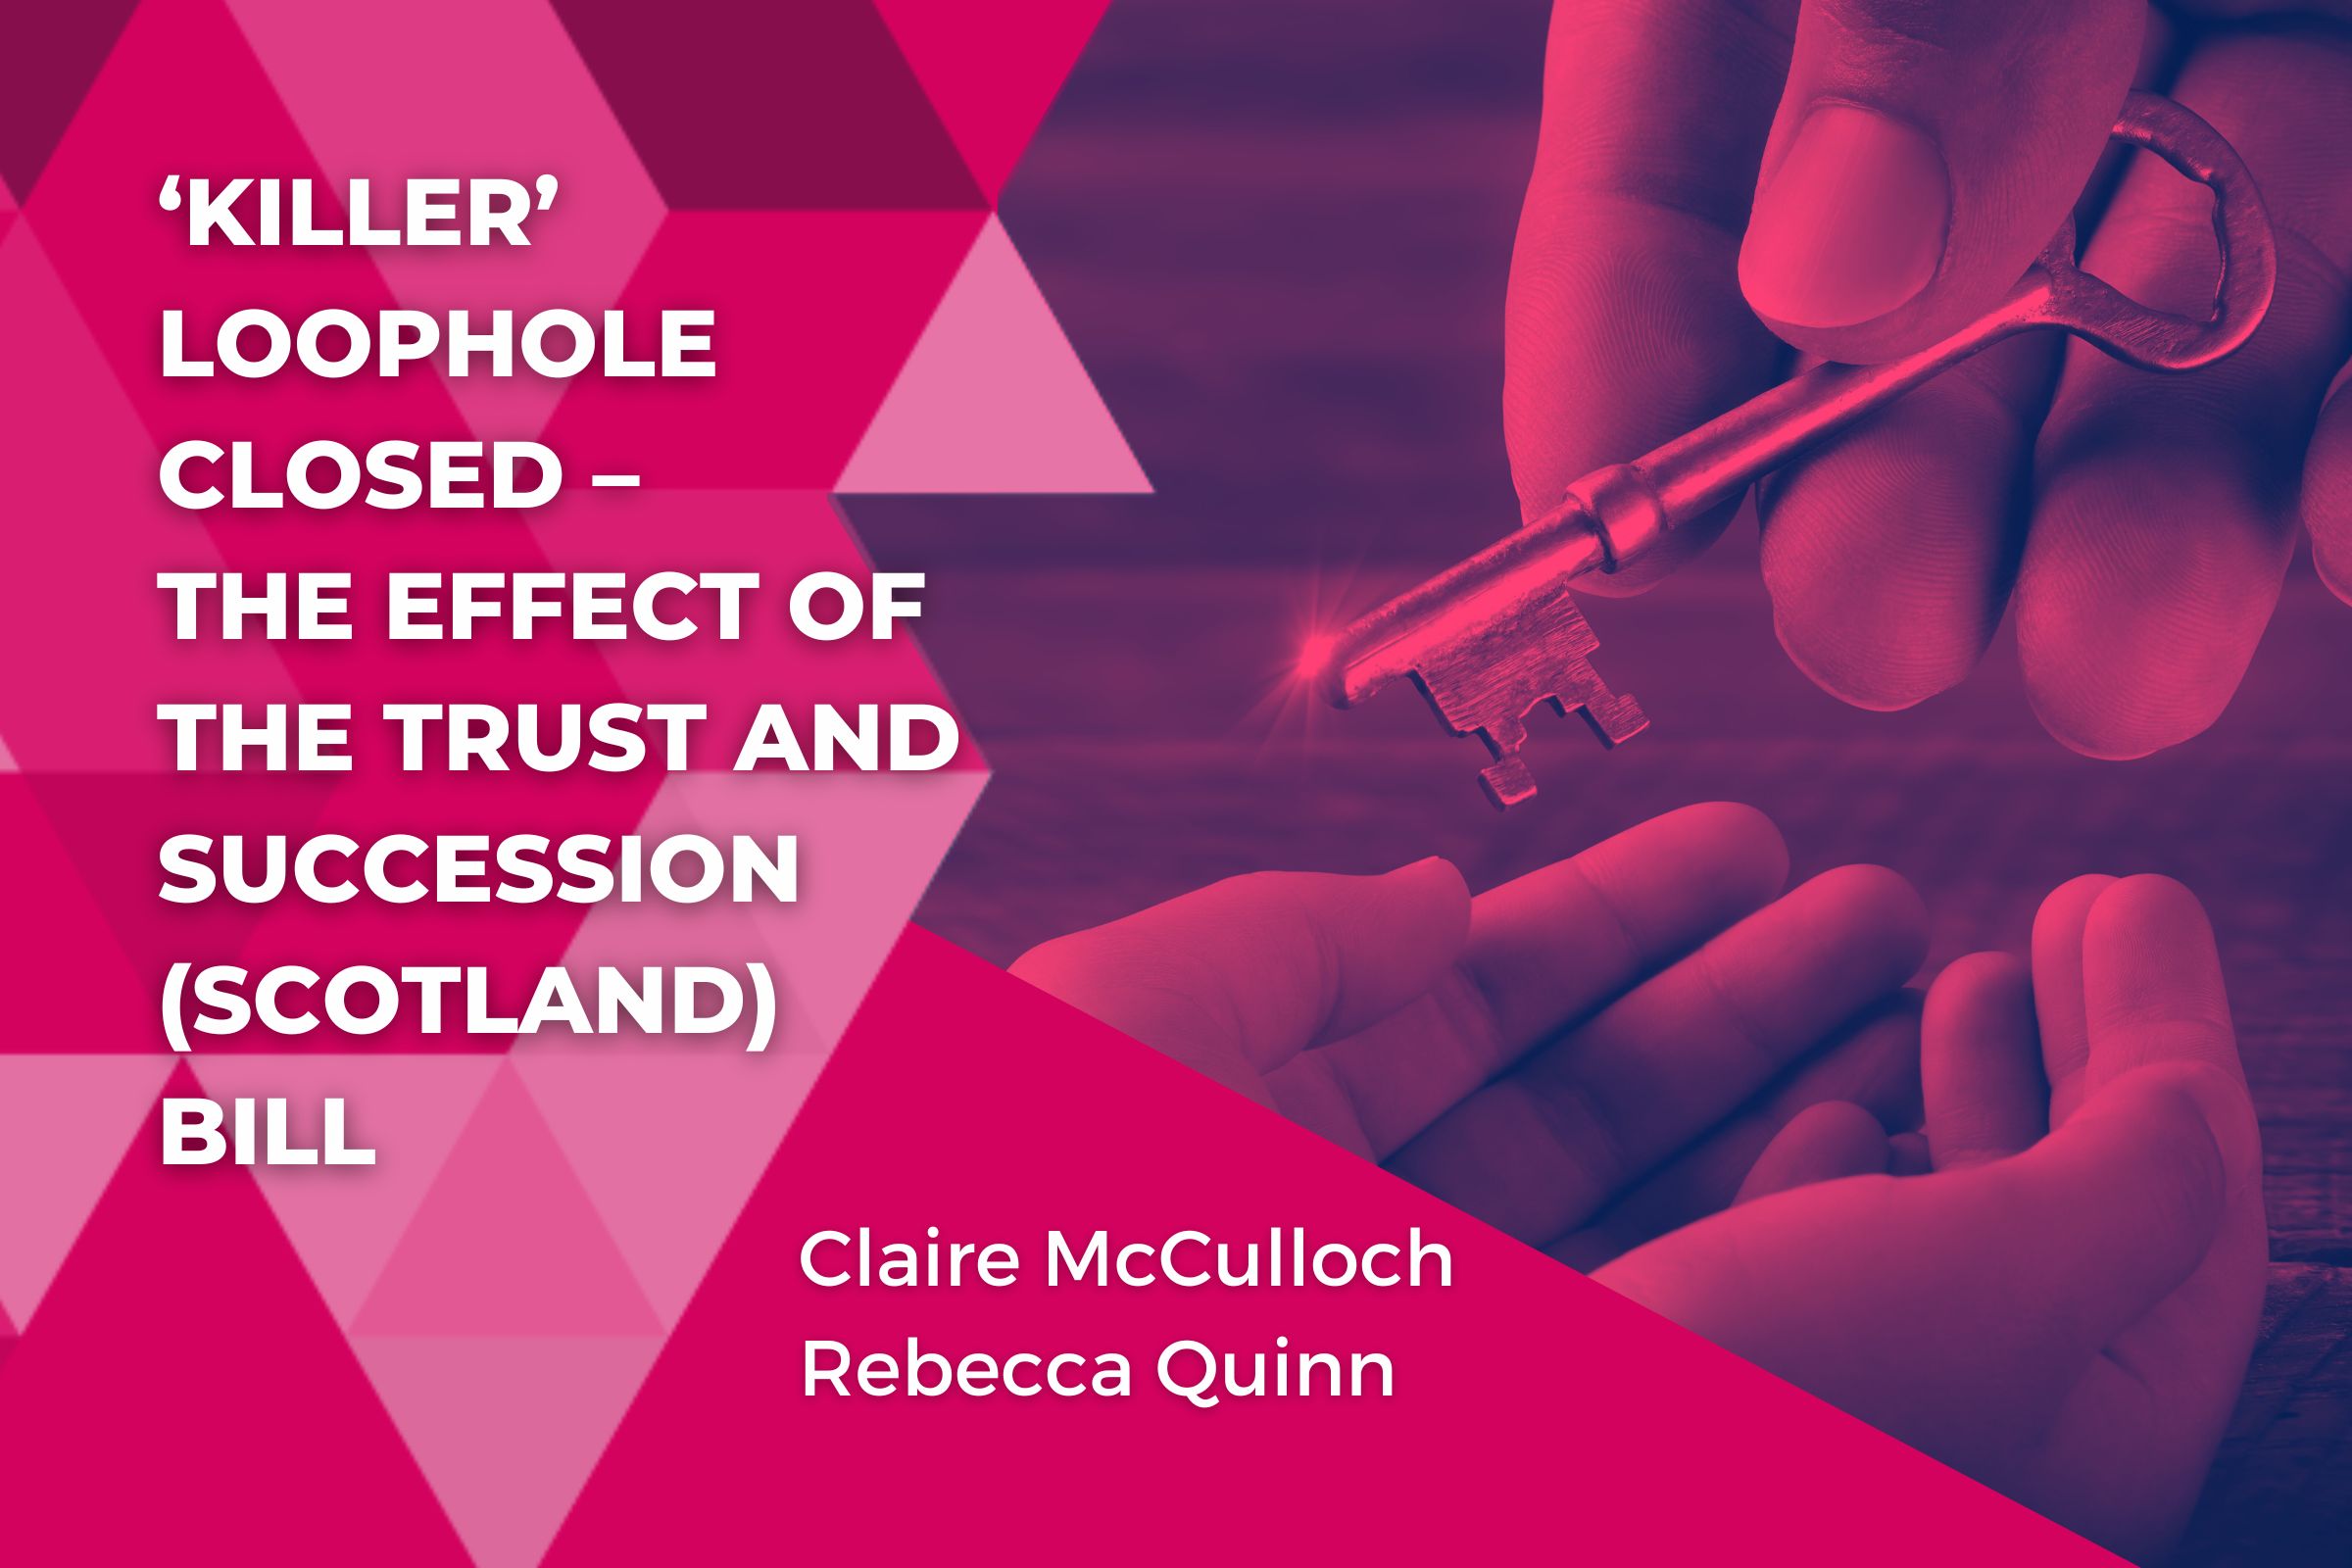  Killer Loophole Closed The Effect of The Trust and Succession Scotland Bill